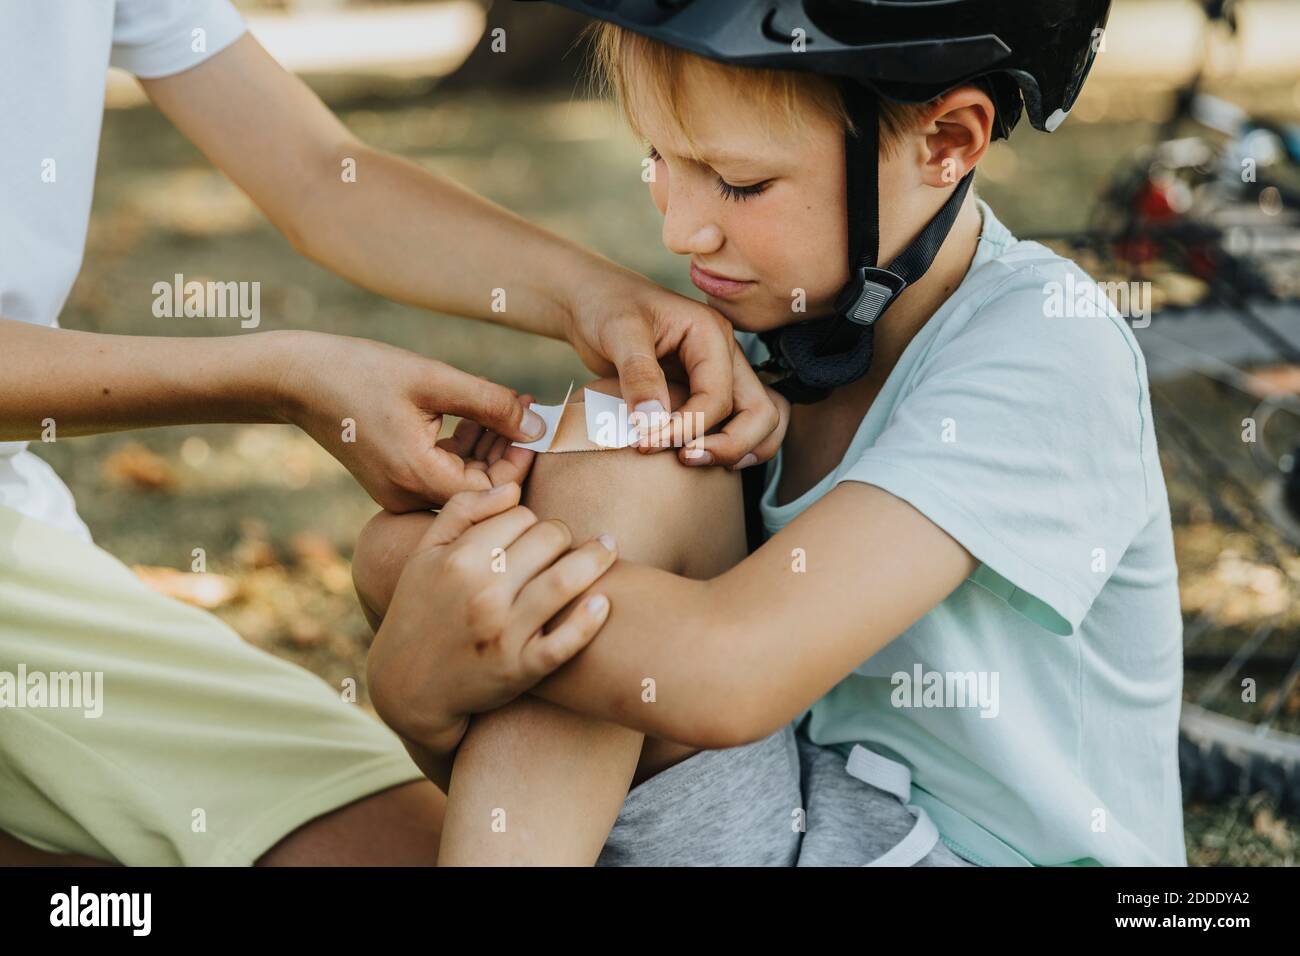 Boy putting bandage on younger brother knee sitting in public park Stock Photo